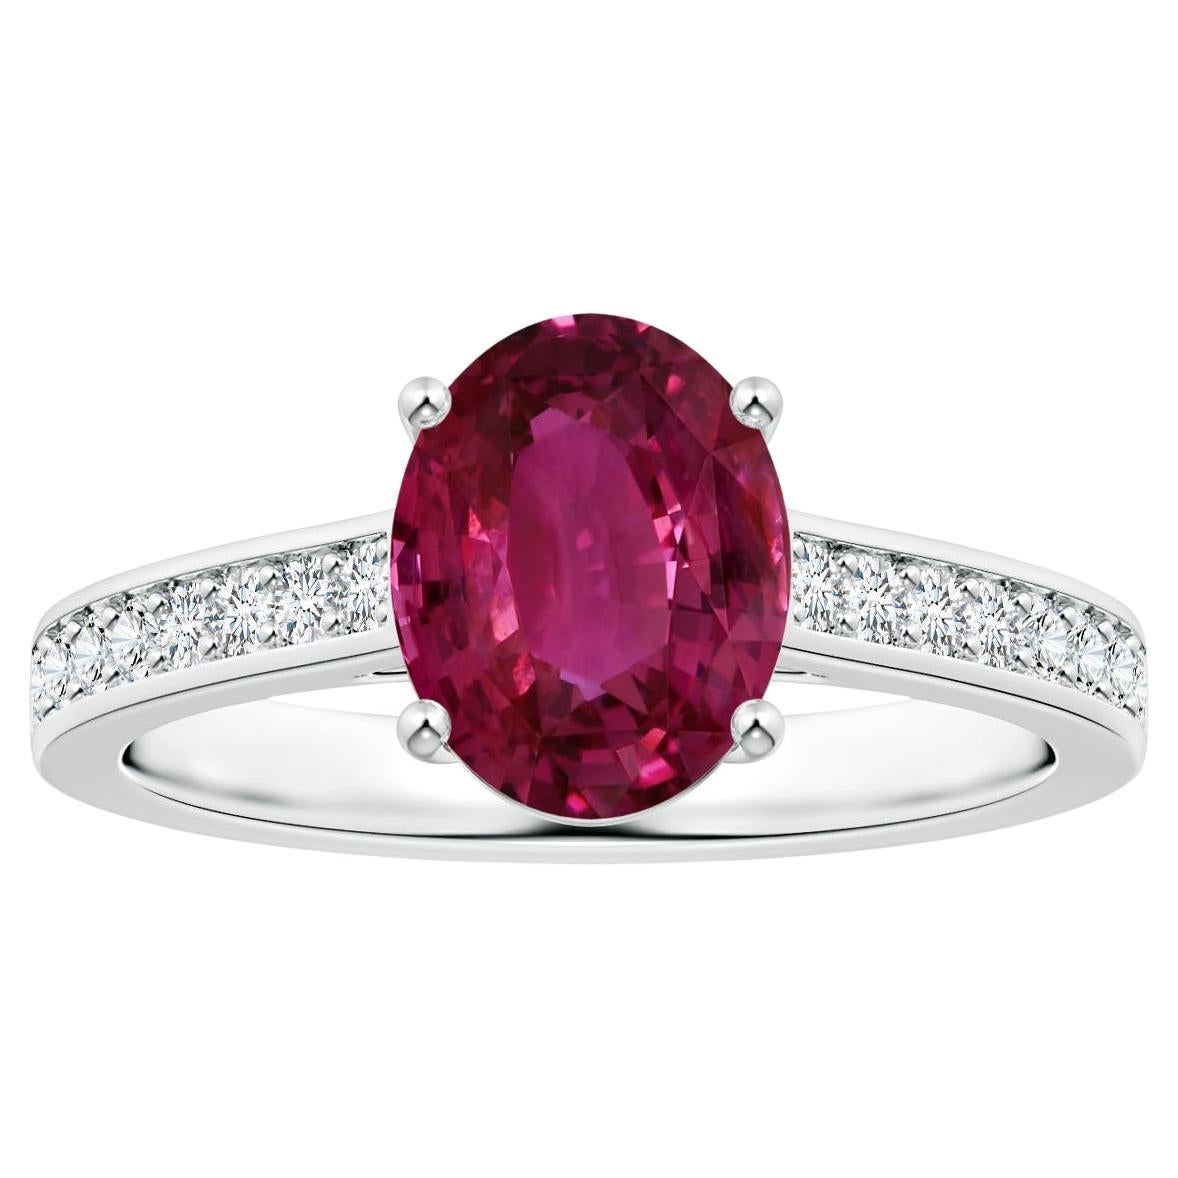 ANGARA Prong-Set GIA Certified Pink Sapphire Ring in White Gold with Diamonds